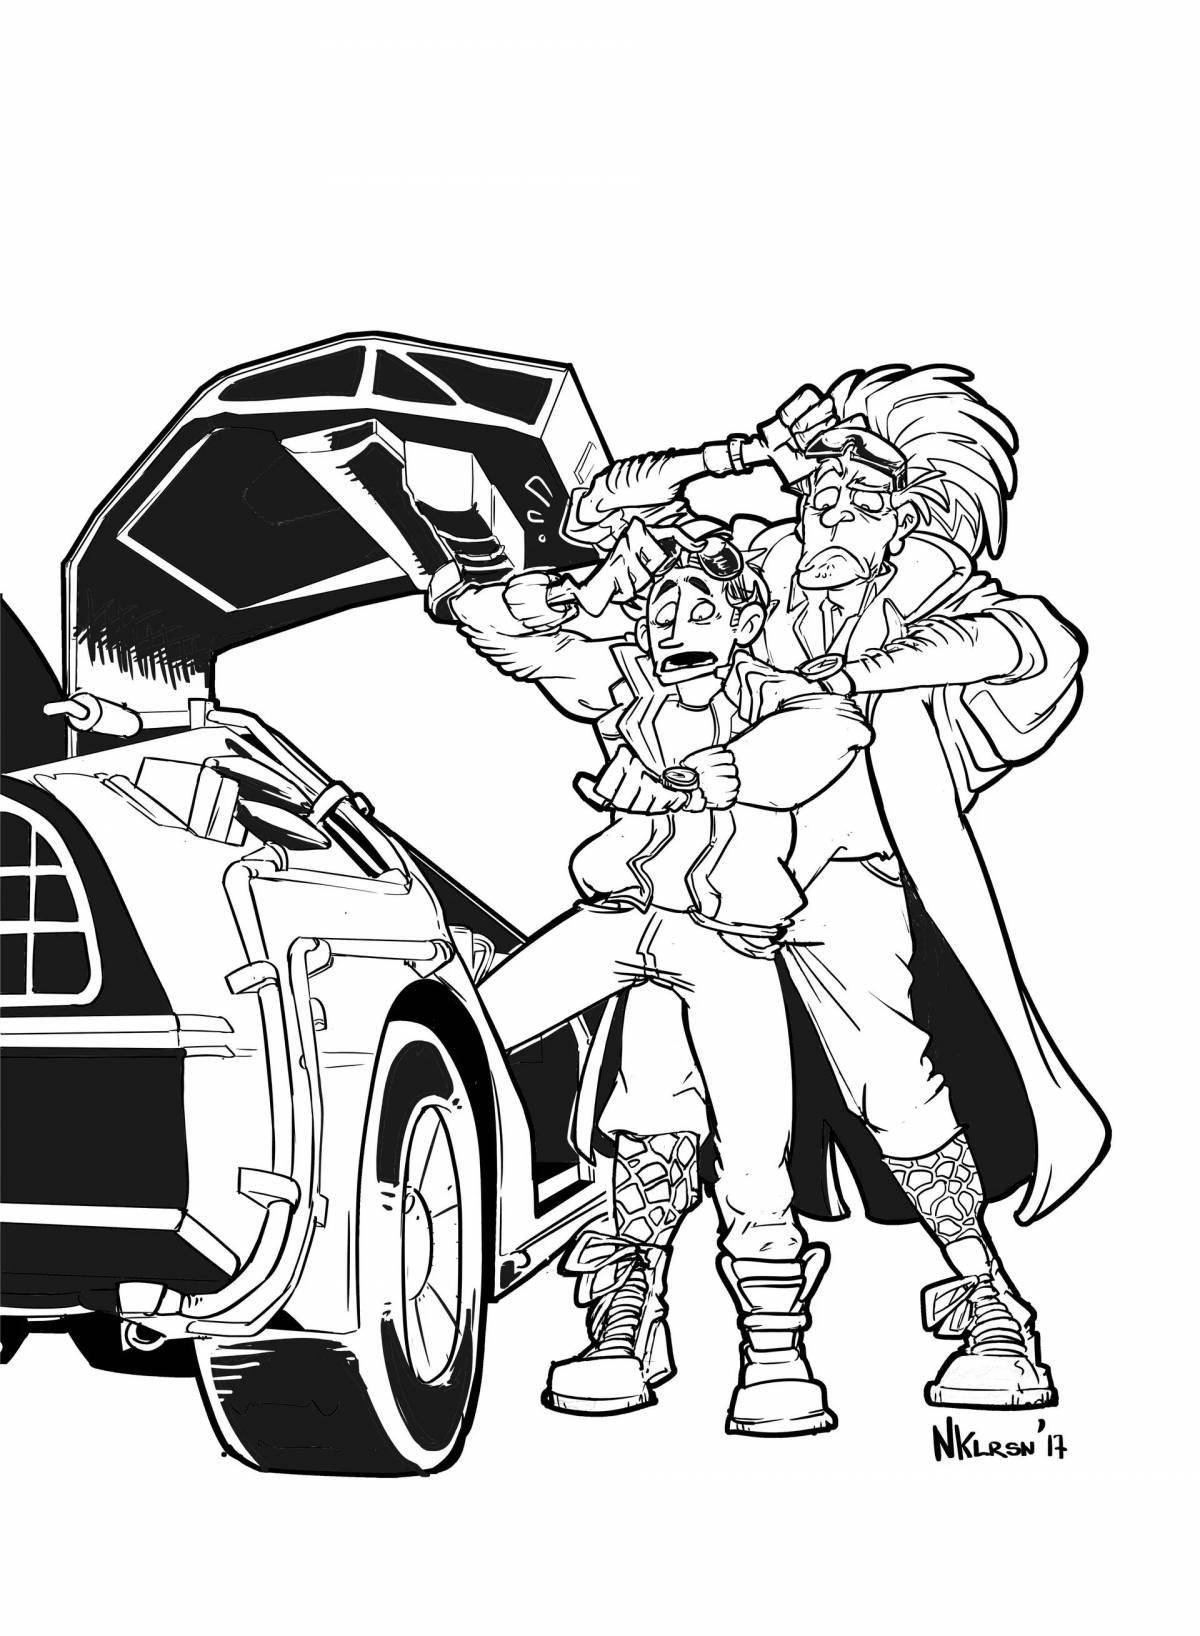 Fantastic back to the future 2 coloring book